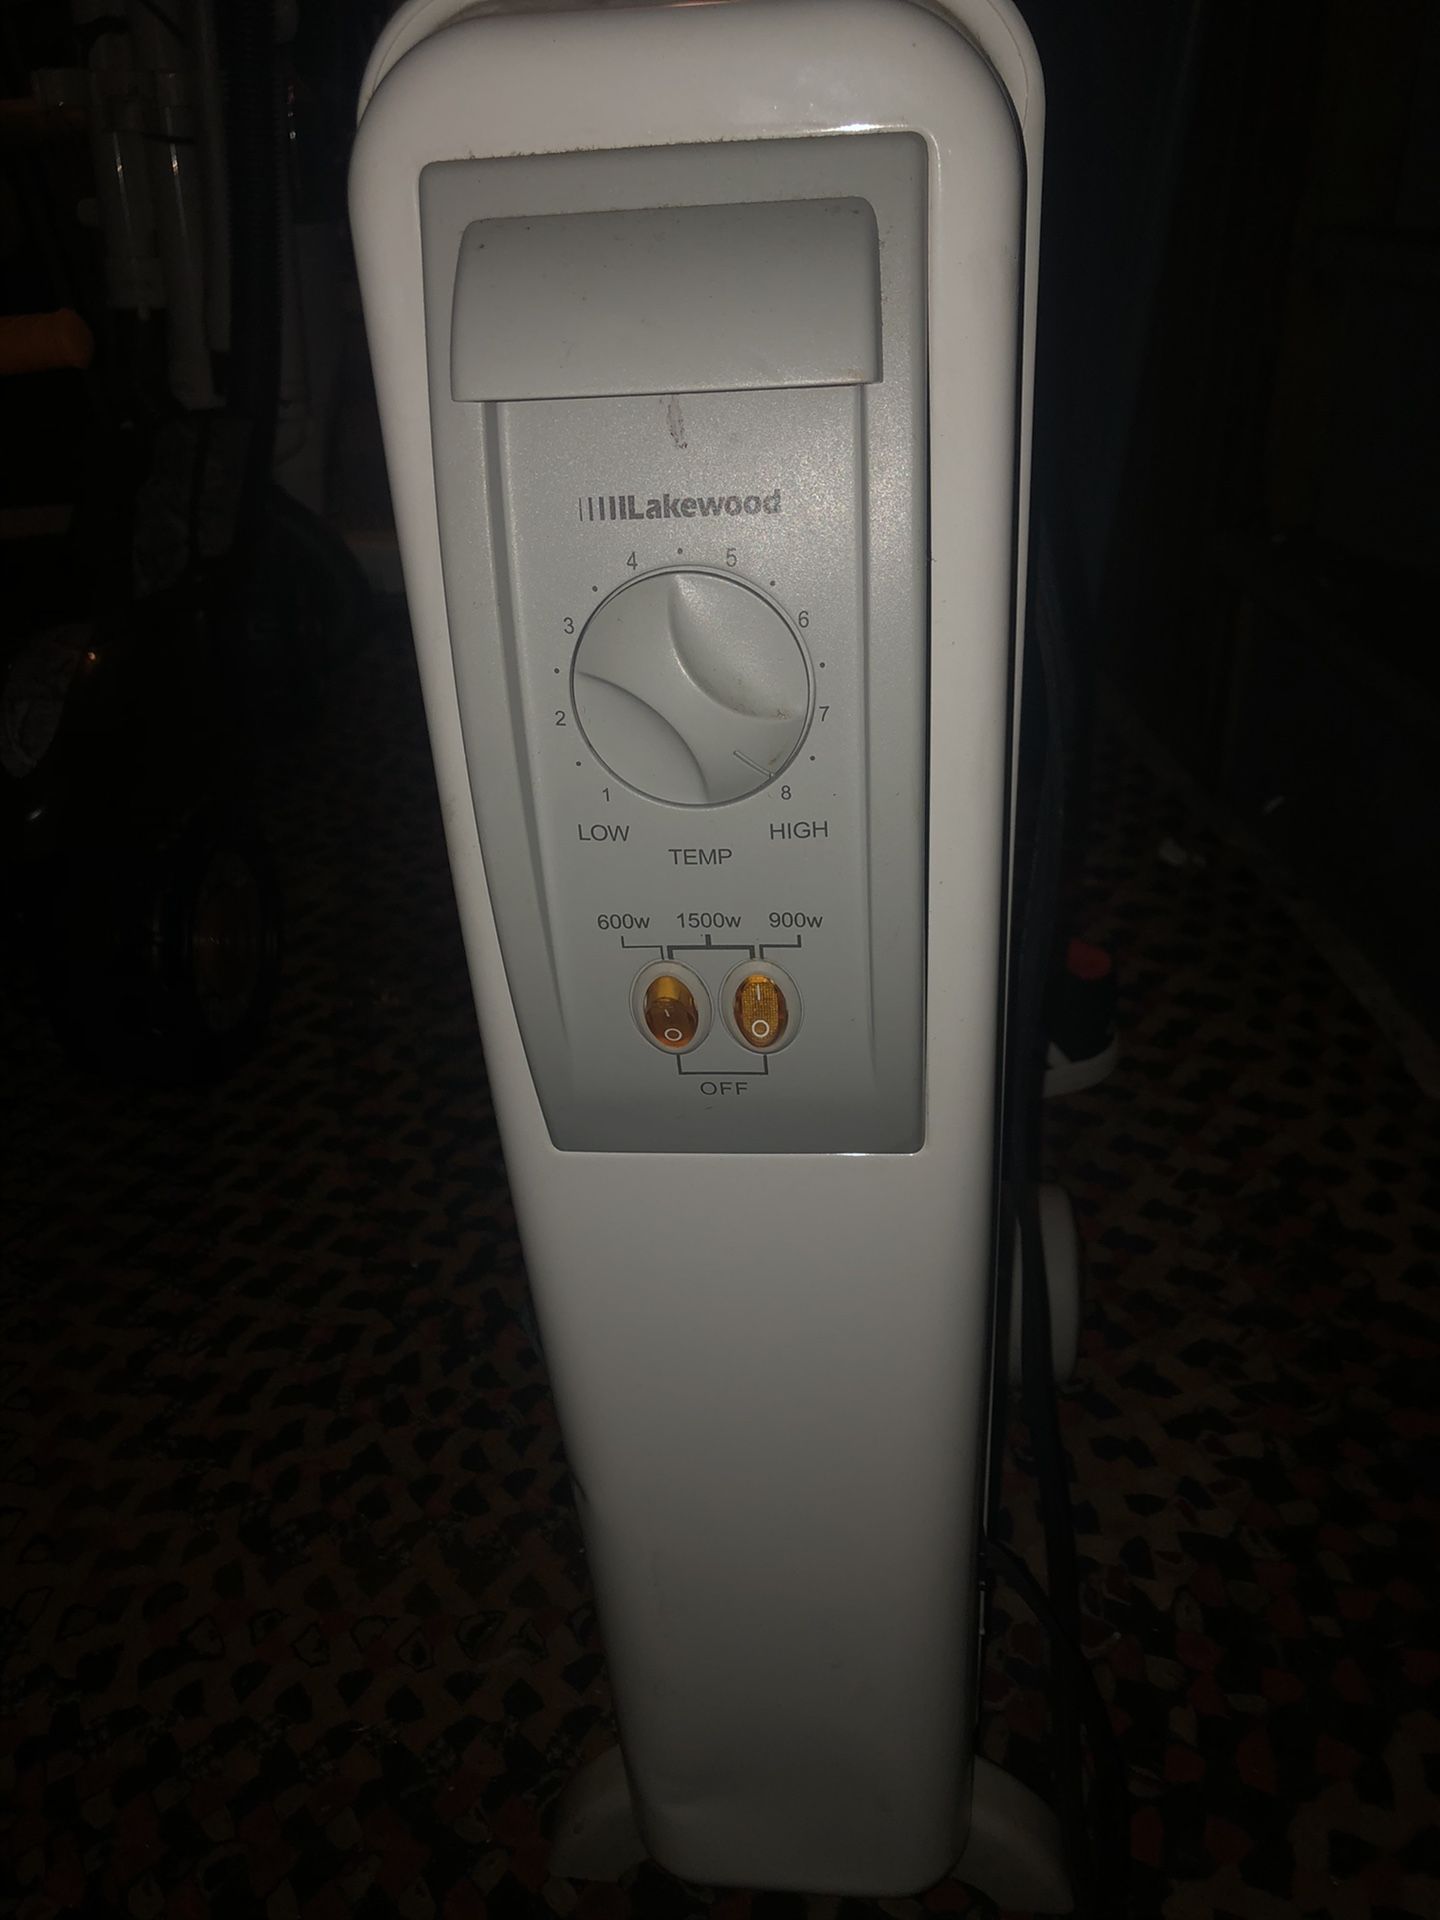 Lakewood space heater never used